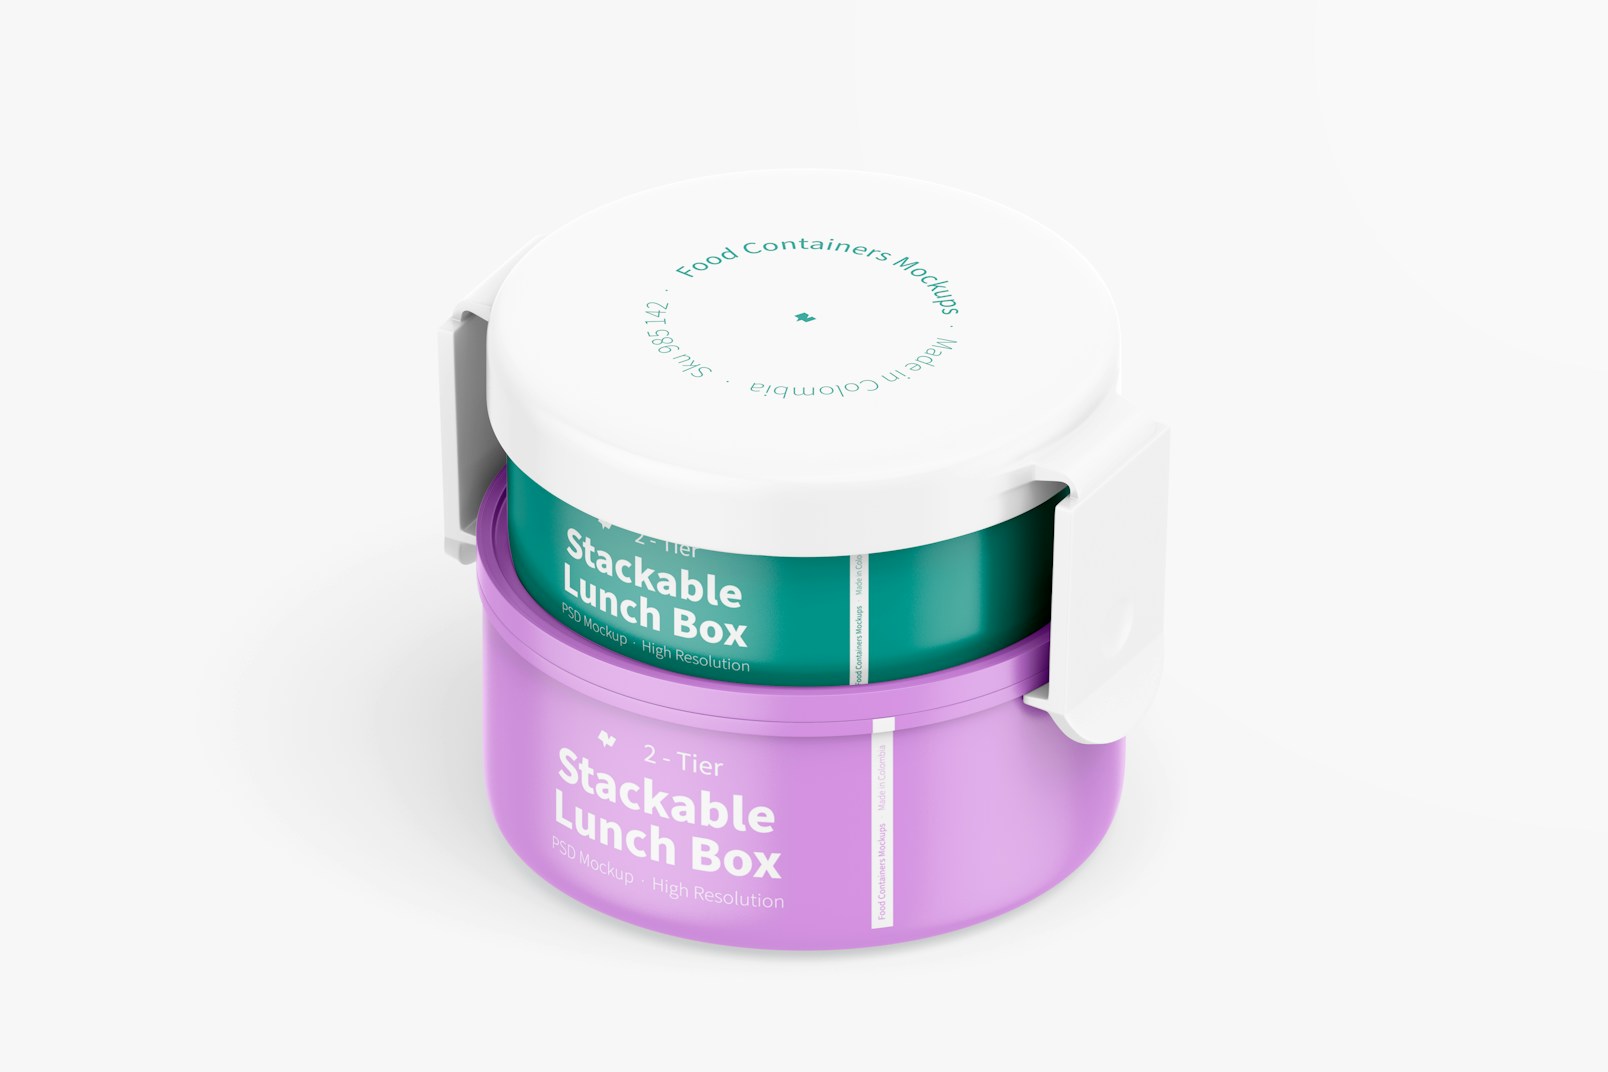 2-Tier Stackable Lunch Box Mockup, Isometric View